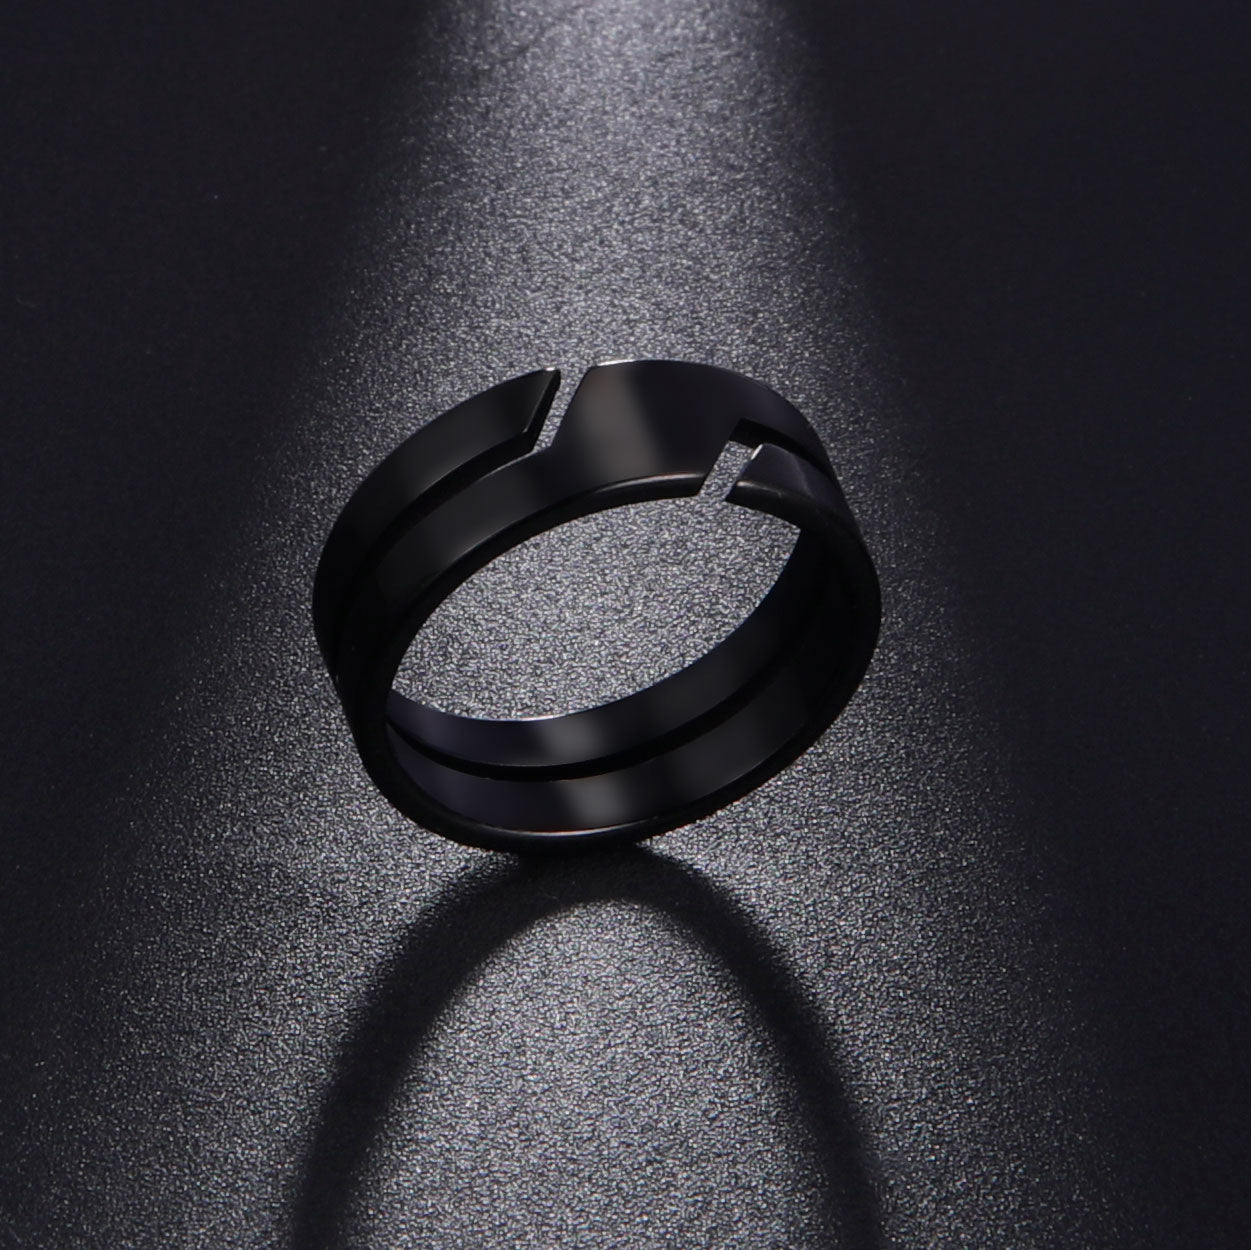 Solid jewelry Stainless Steel Rings